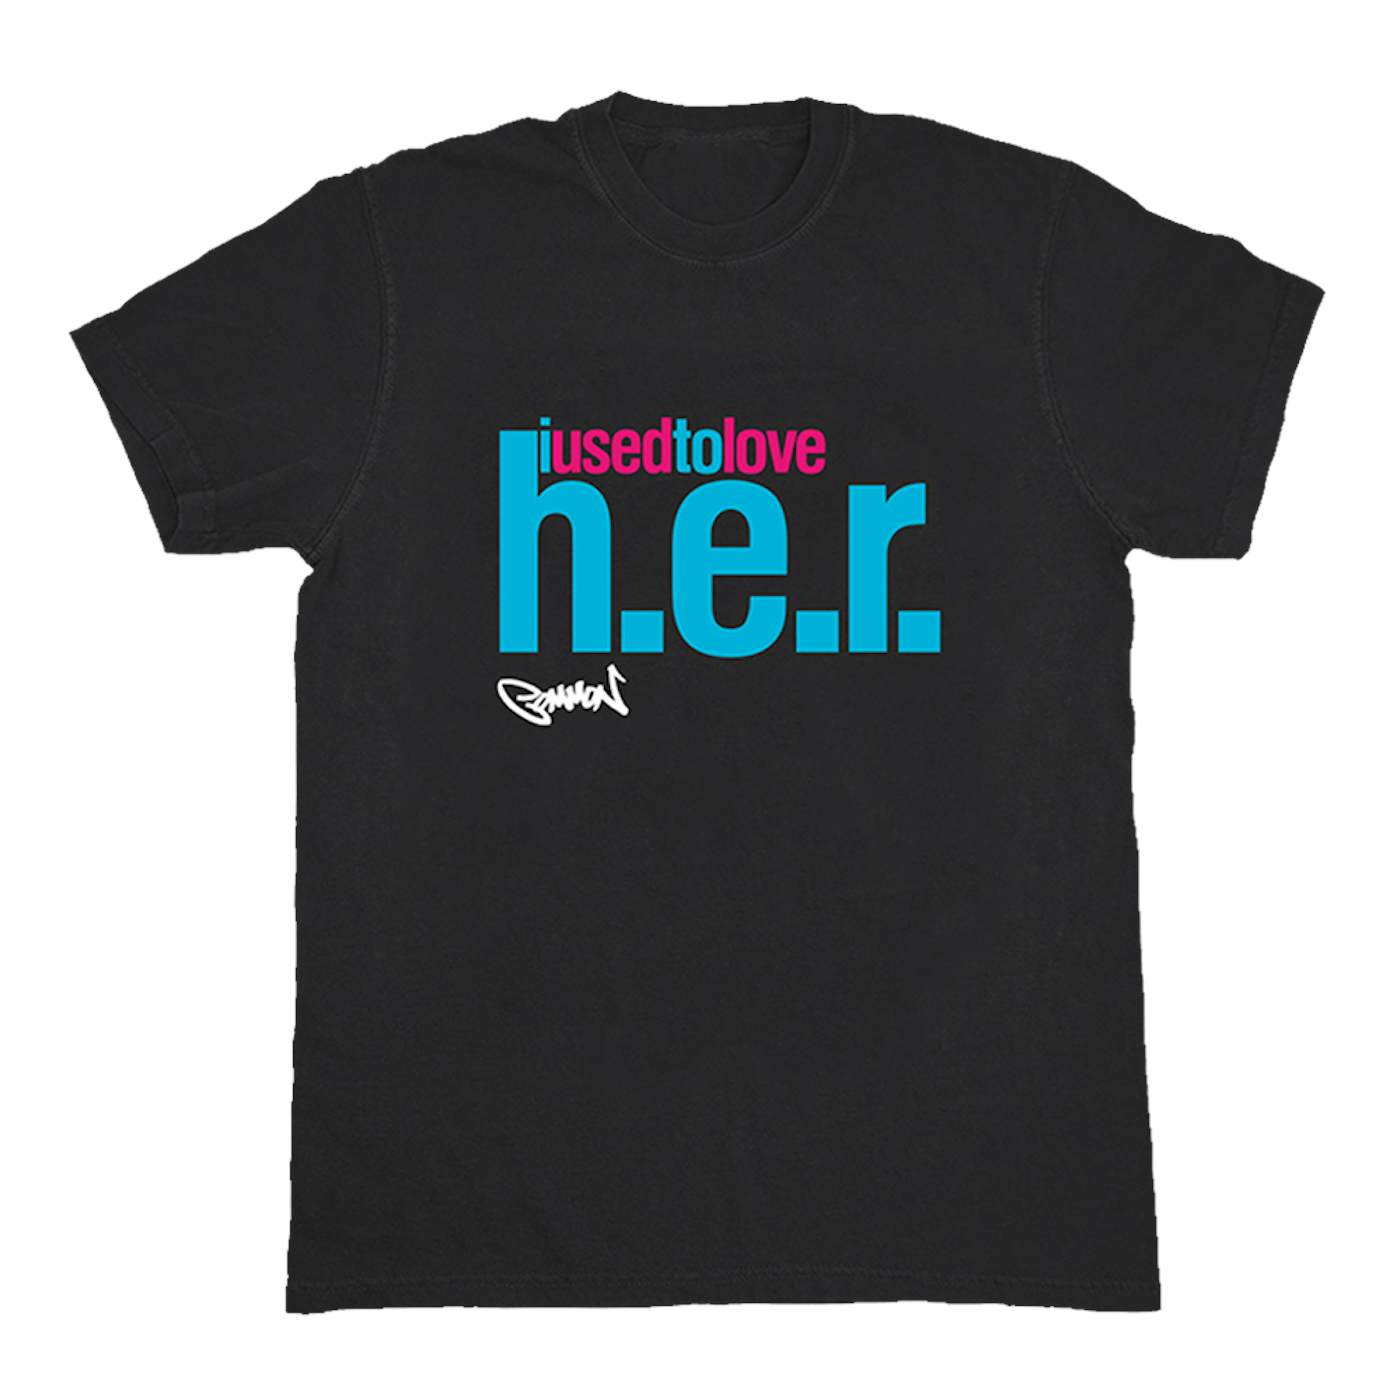 Common I Used to Love H.E.R. T-shirt